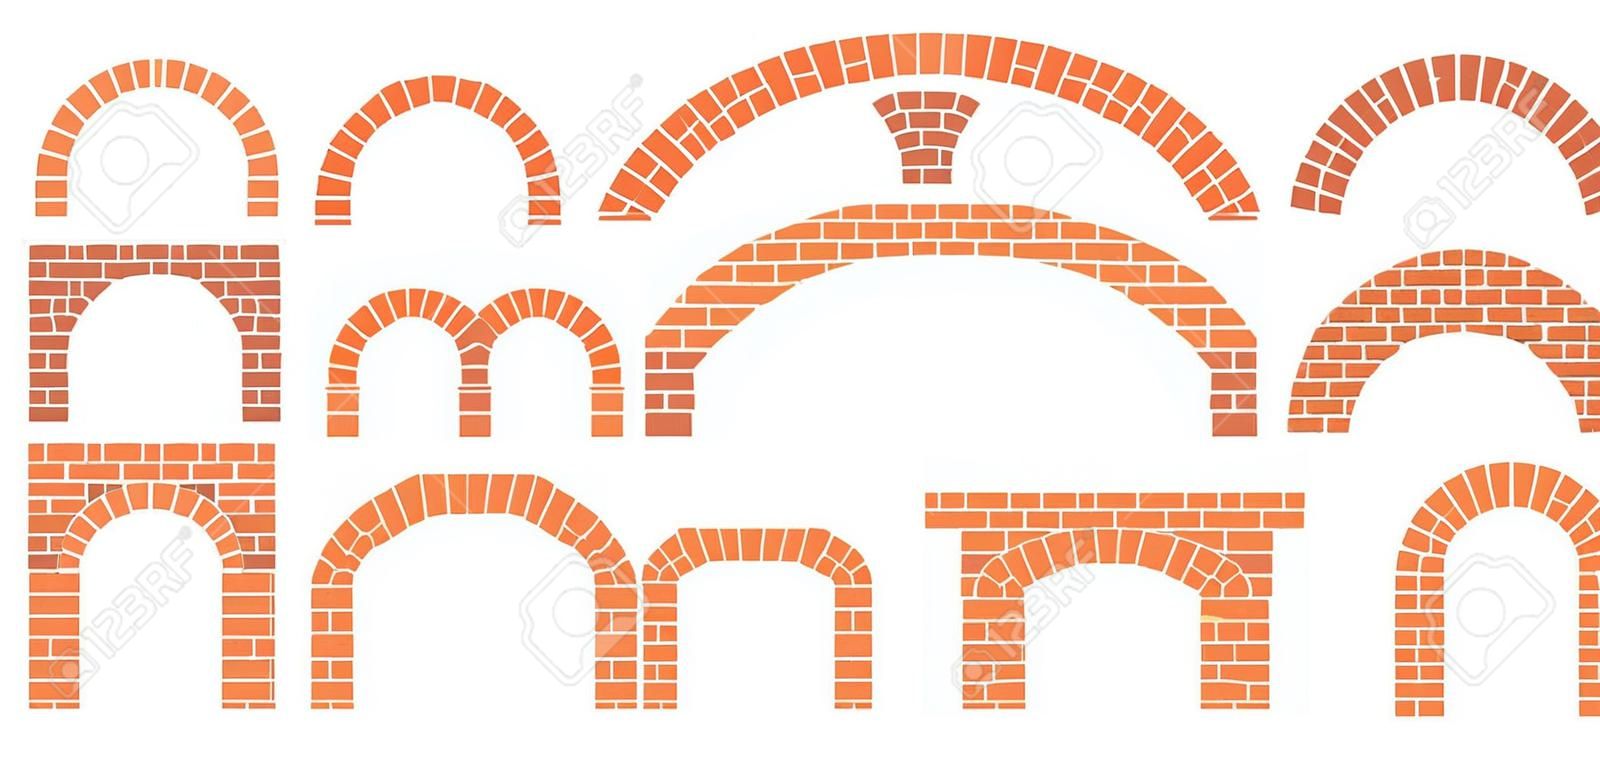 Brick archs set. Masonry icons in flat style. Vector illustration on a white background.